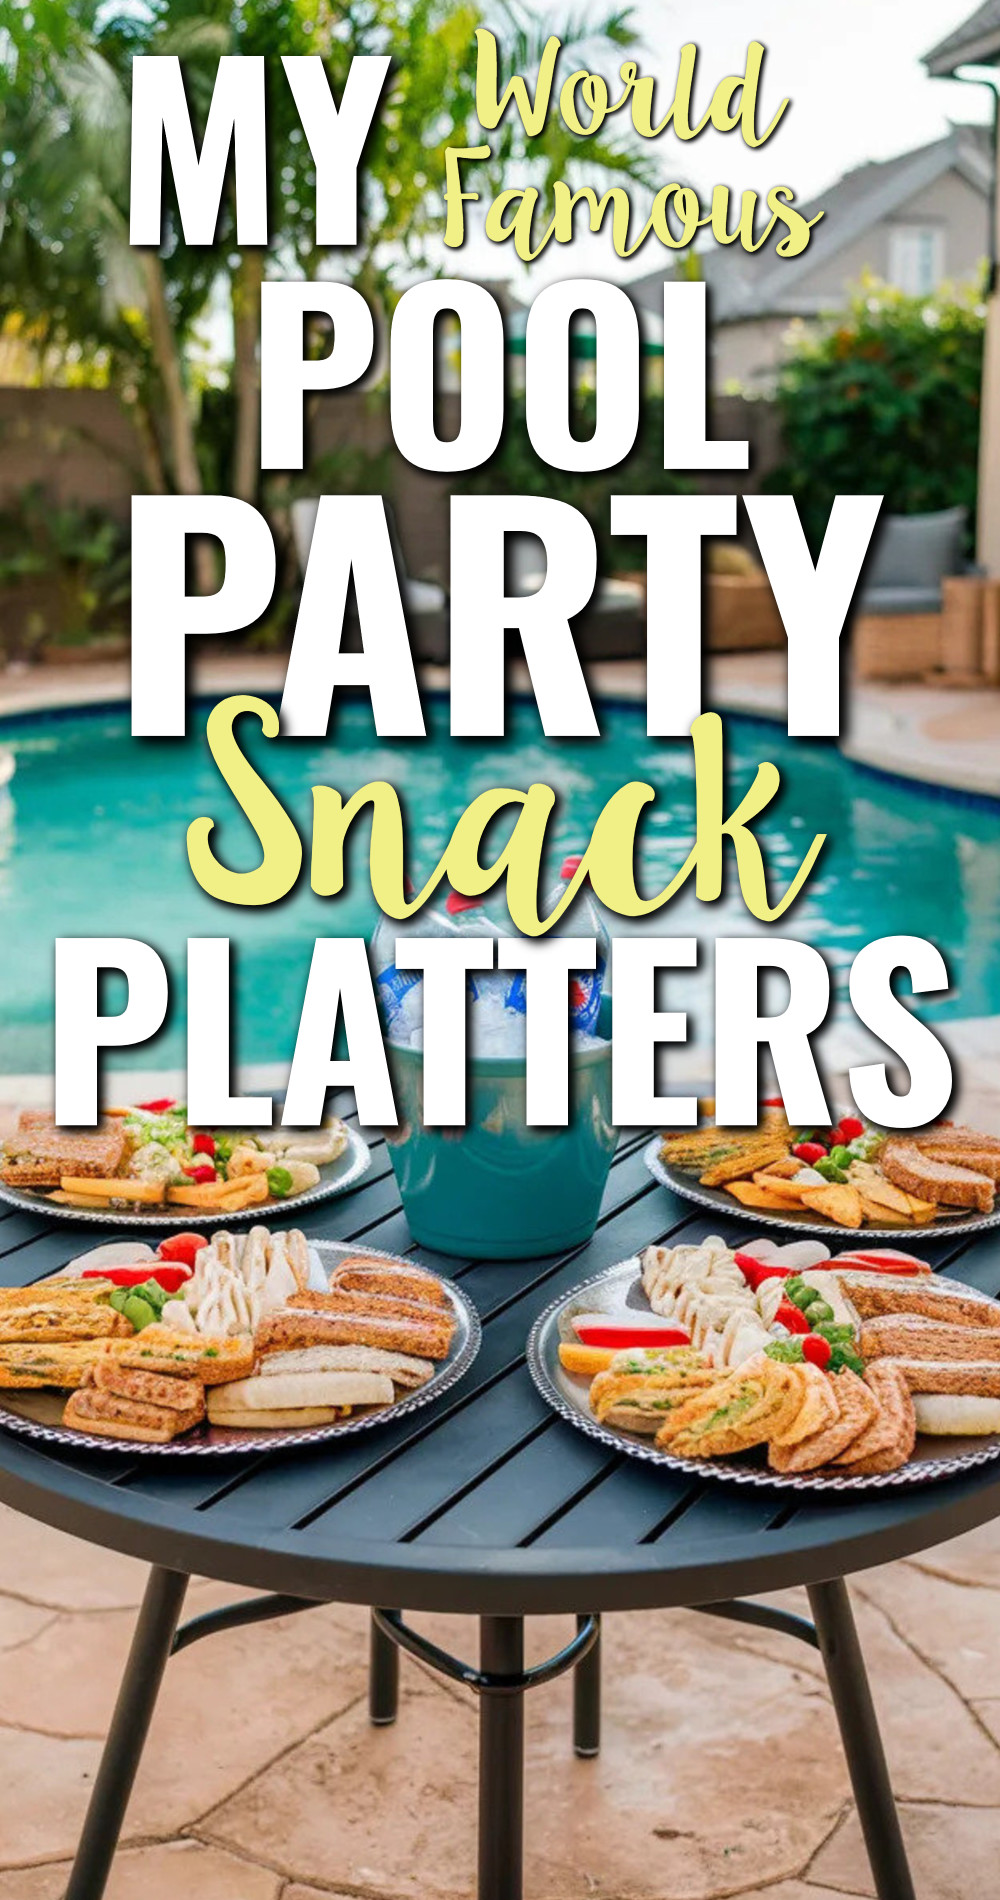 My World Famous Pool Party Snack Platters